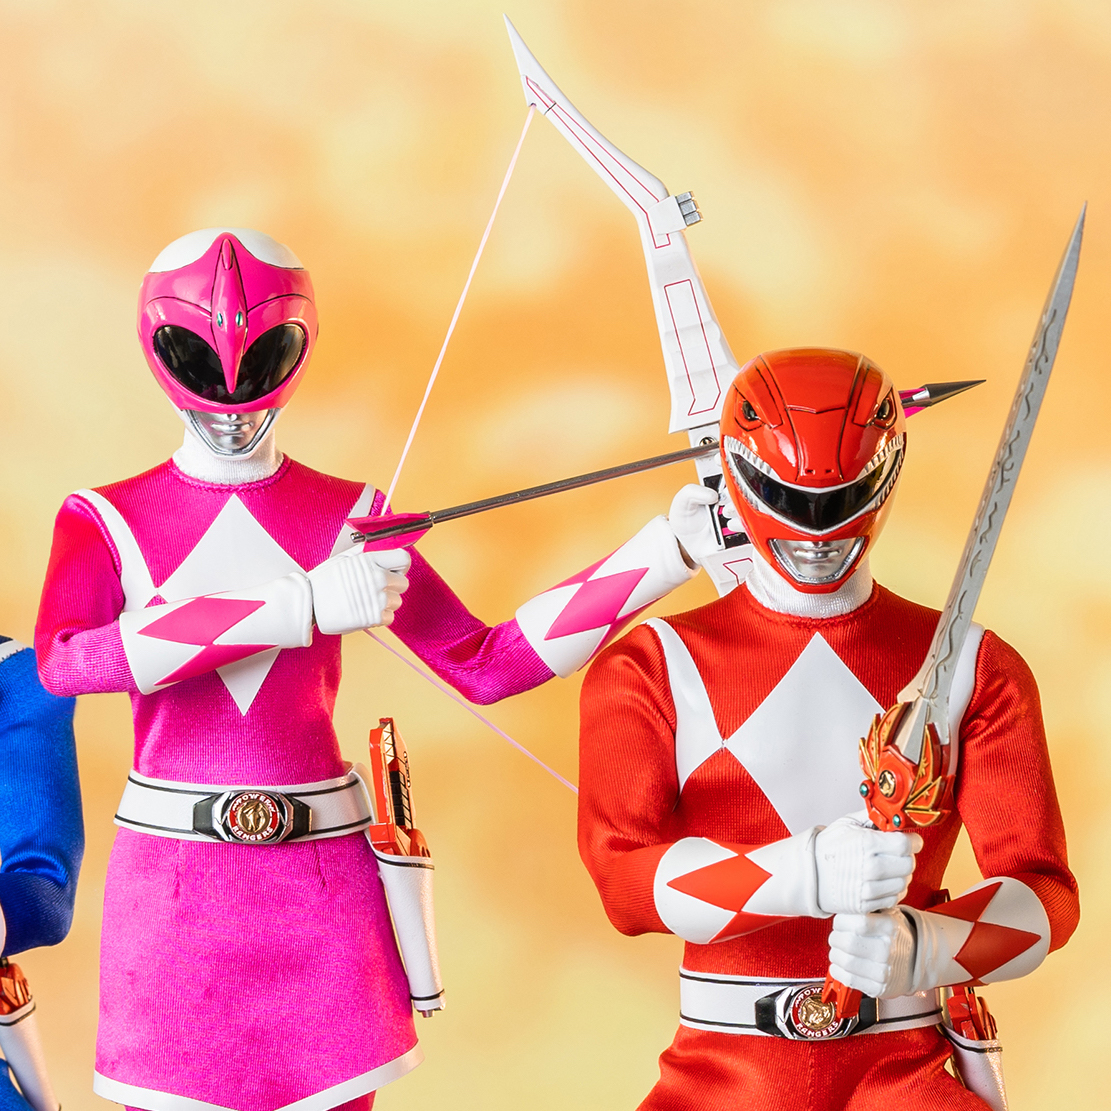 Dino Super Charge Steel Pink Ranger MMPR Power Rangers Figure MOSC Bandai 2015 for sale online